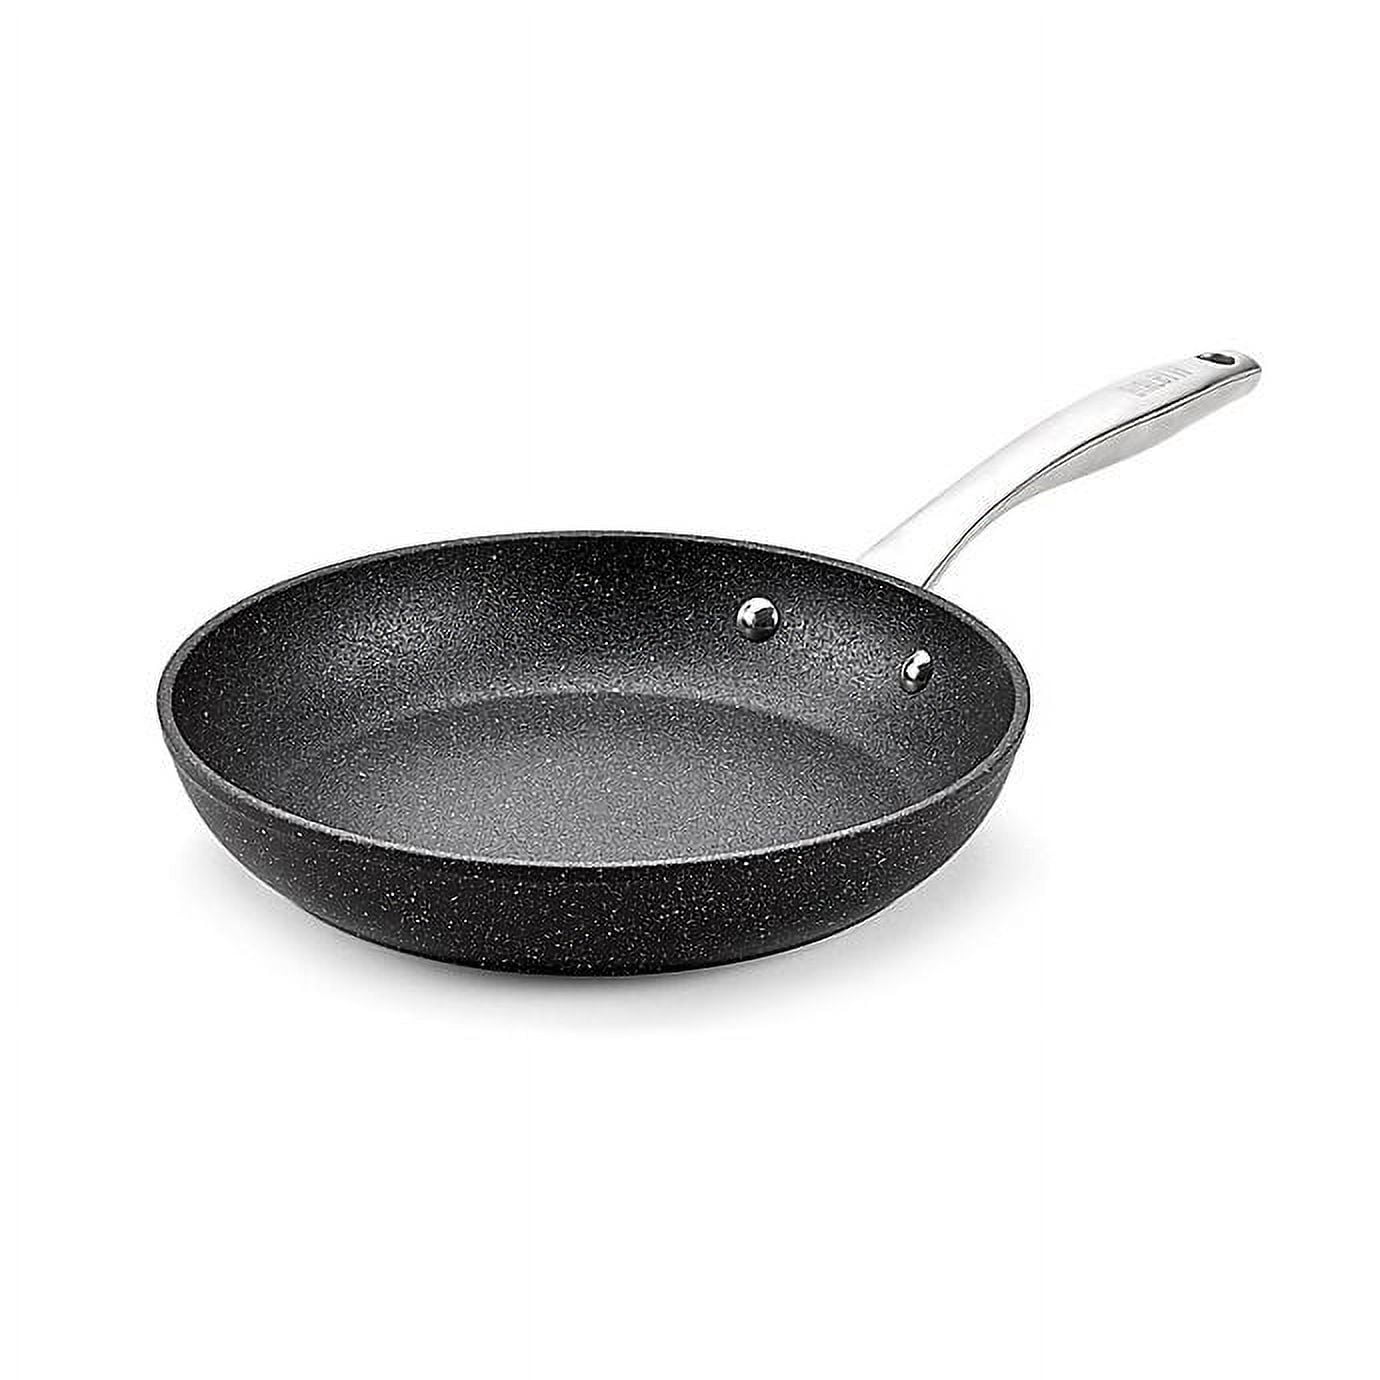 New Bialetti 10 Inch Frying Pan Skillet - Model No 07263 - Free Shipping